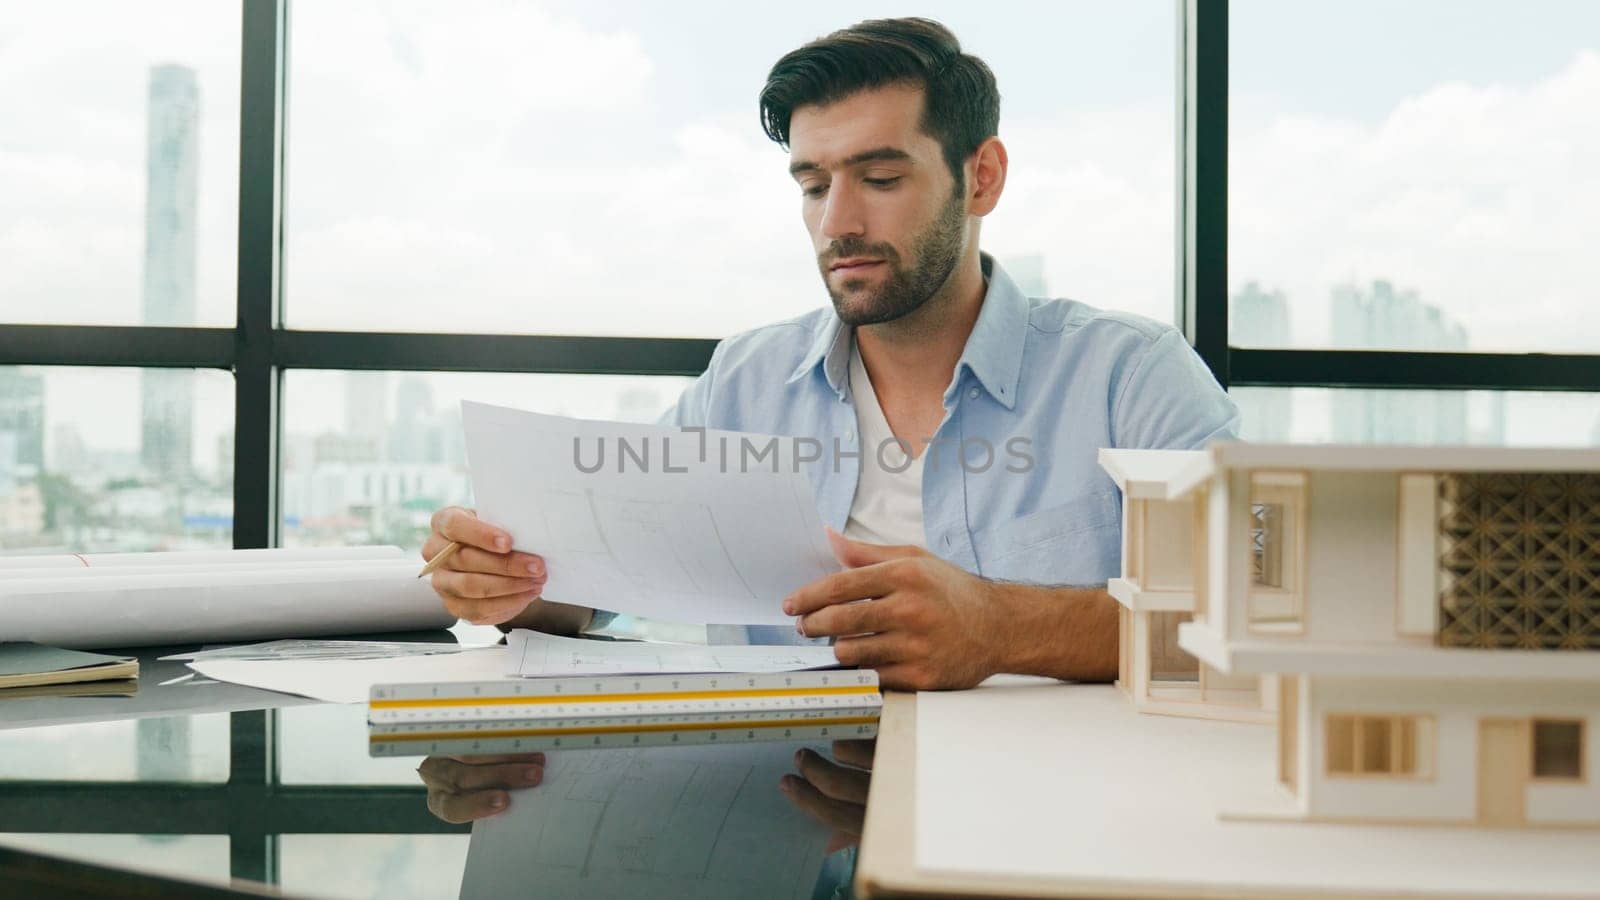 Skilled smart architect engineer writing house construction on blueprint at table with house model, architectural equipment, Interior designer draw, draft, plan building design at office. Disputation